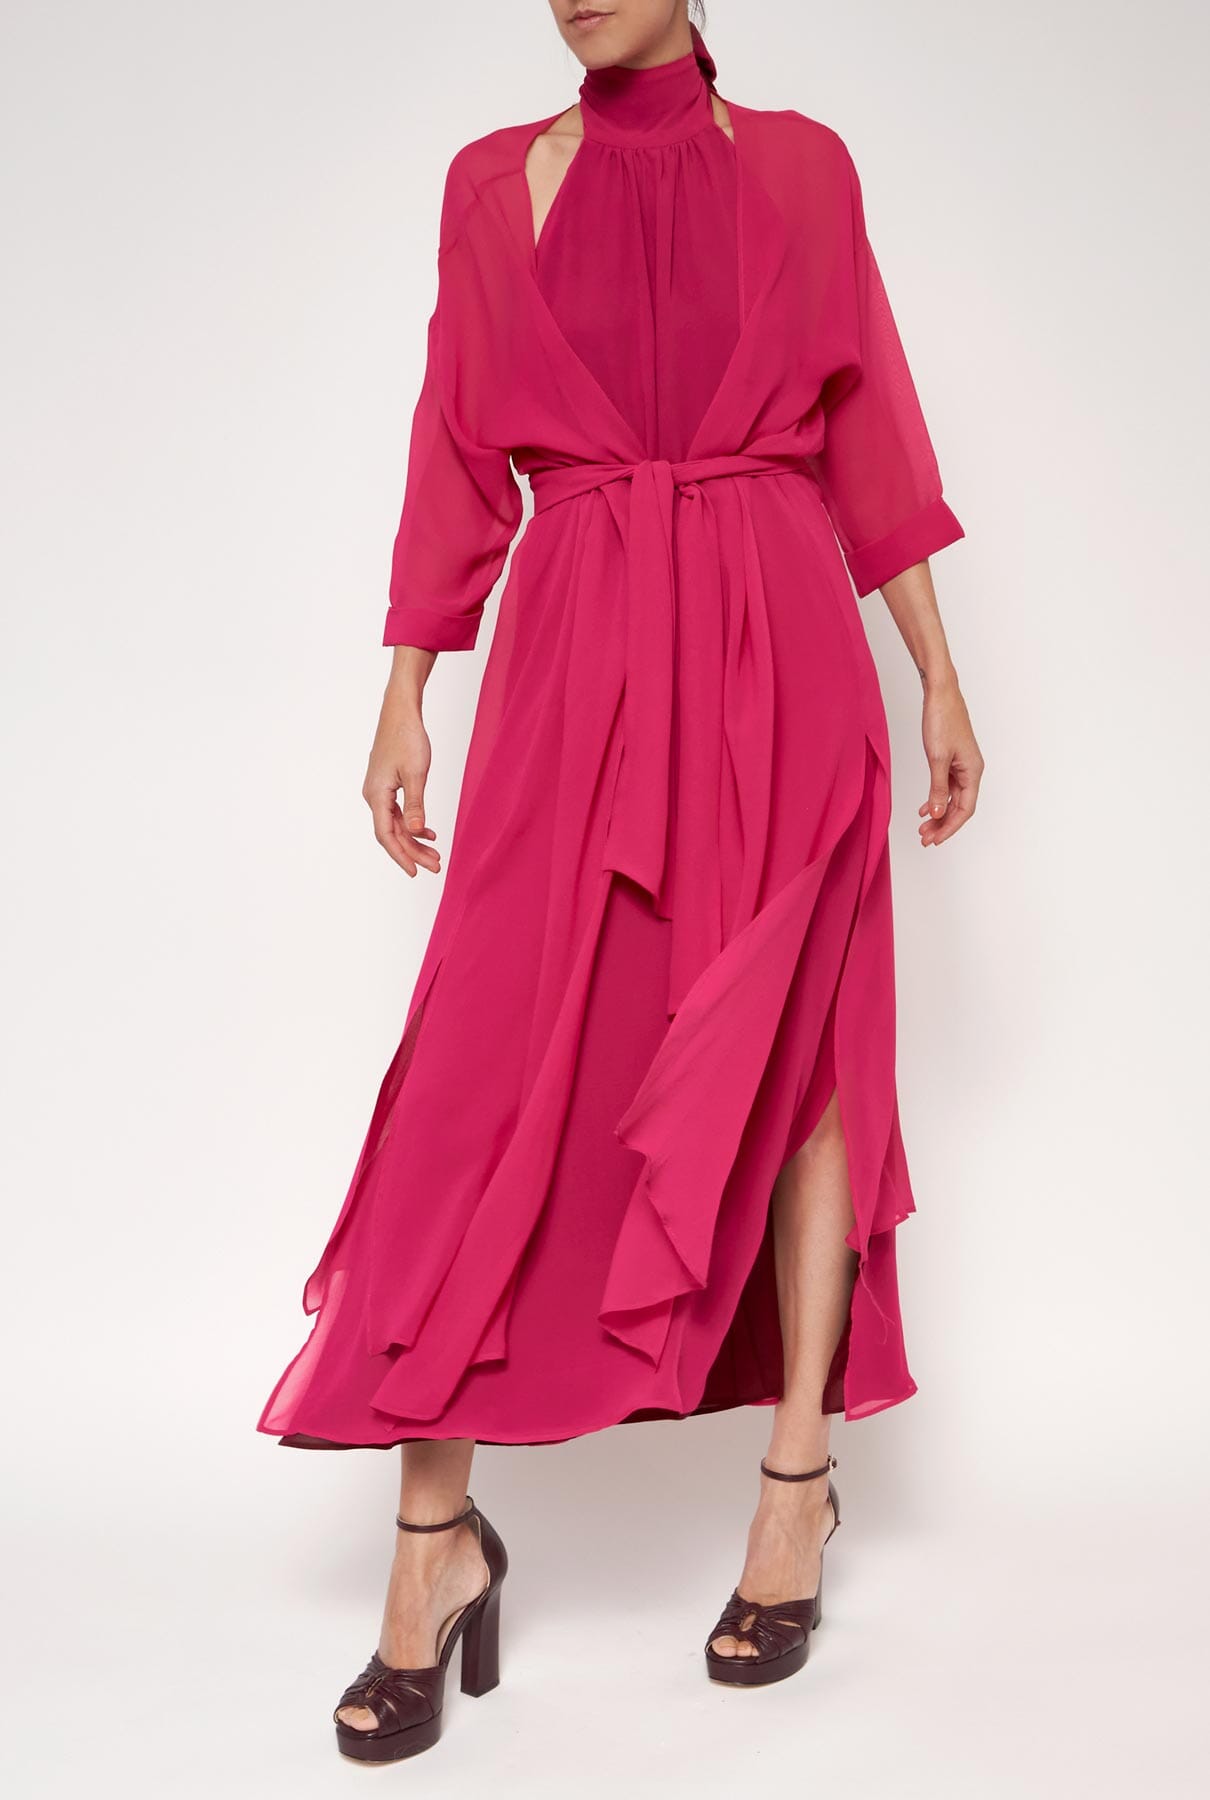 Persefone Overdress Fucsia Capes & shawls Atelier Aletheia 